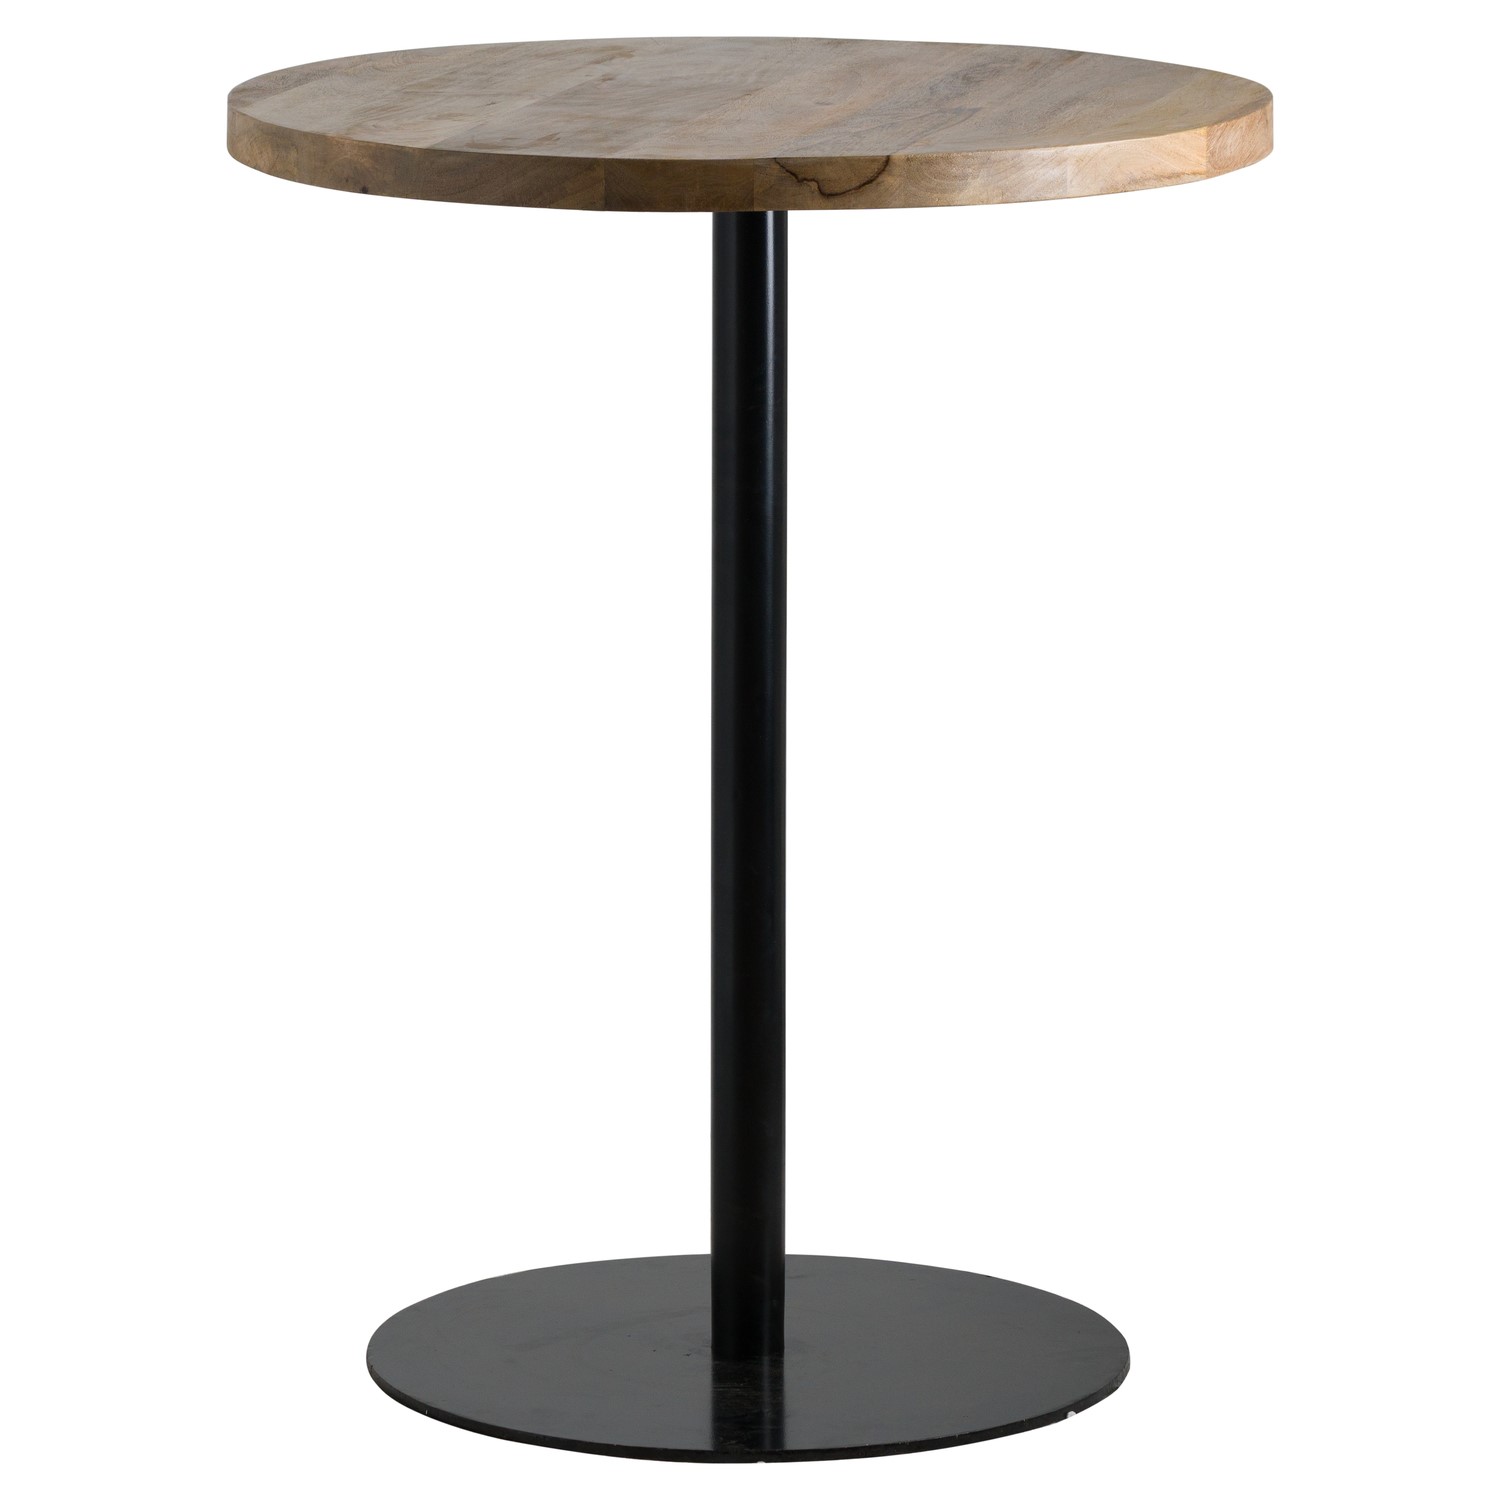 Photo of Round wood and black bar table - franklin